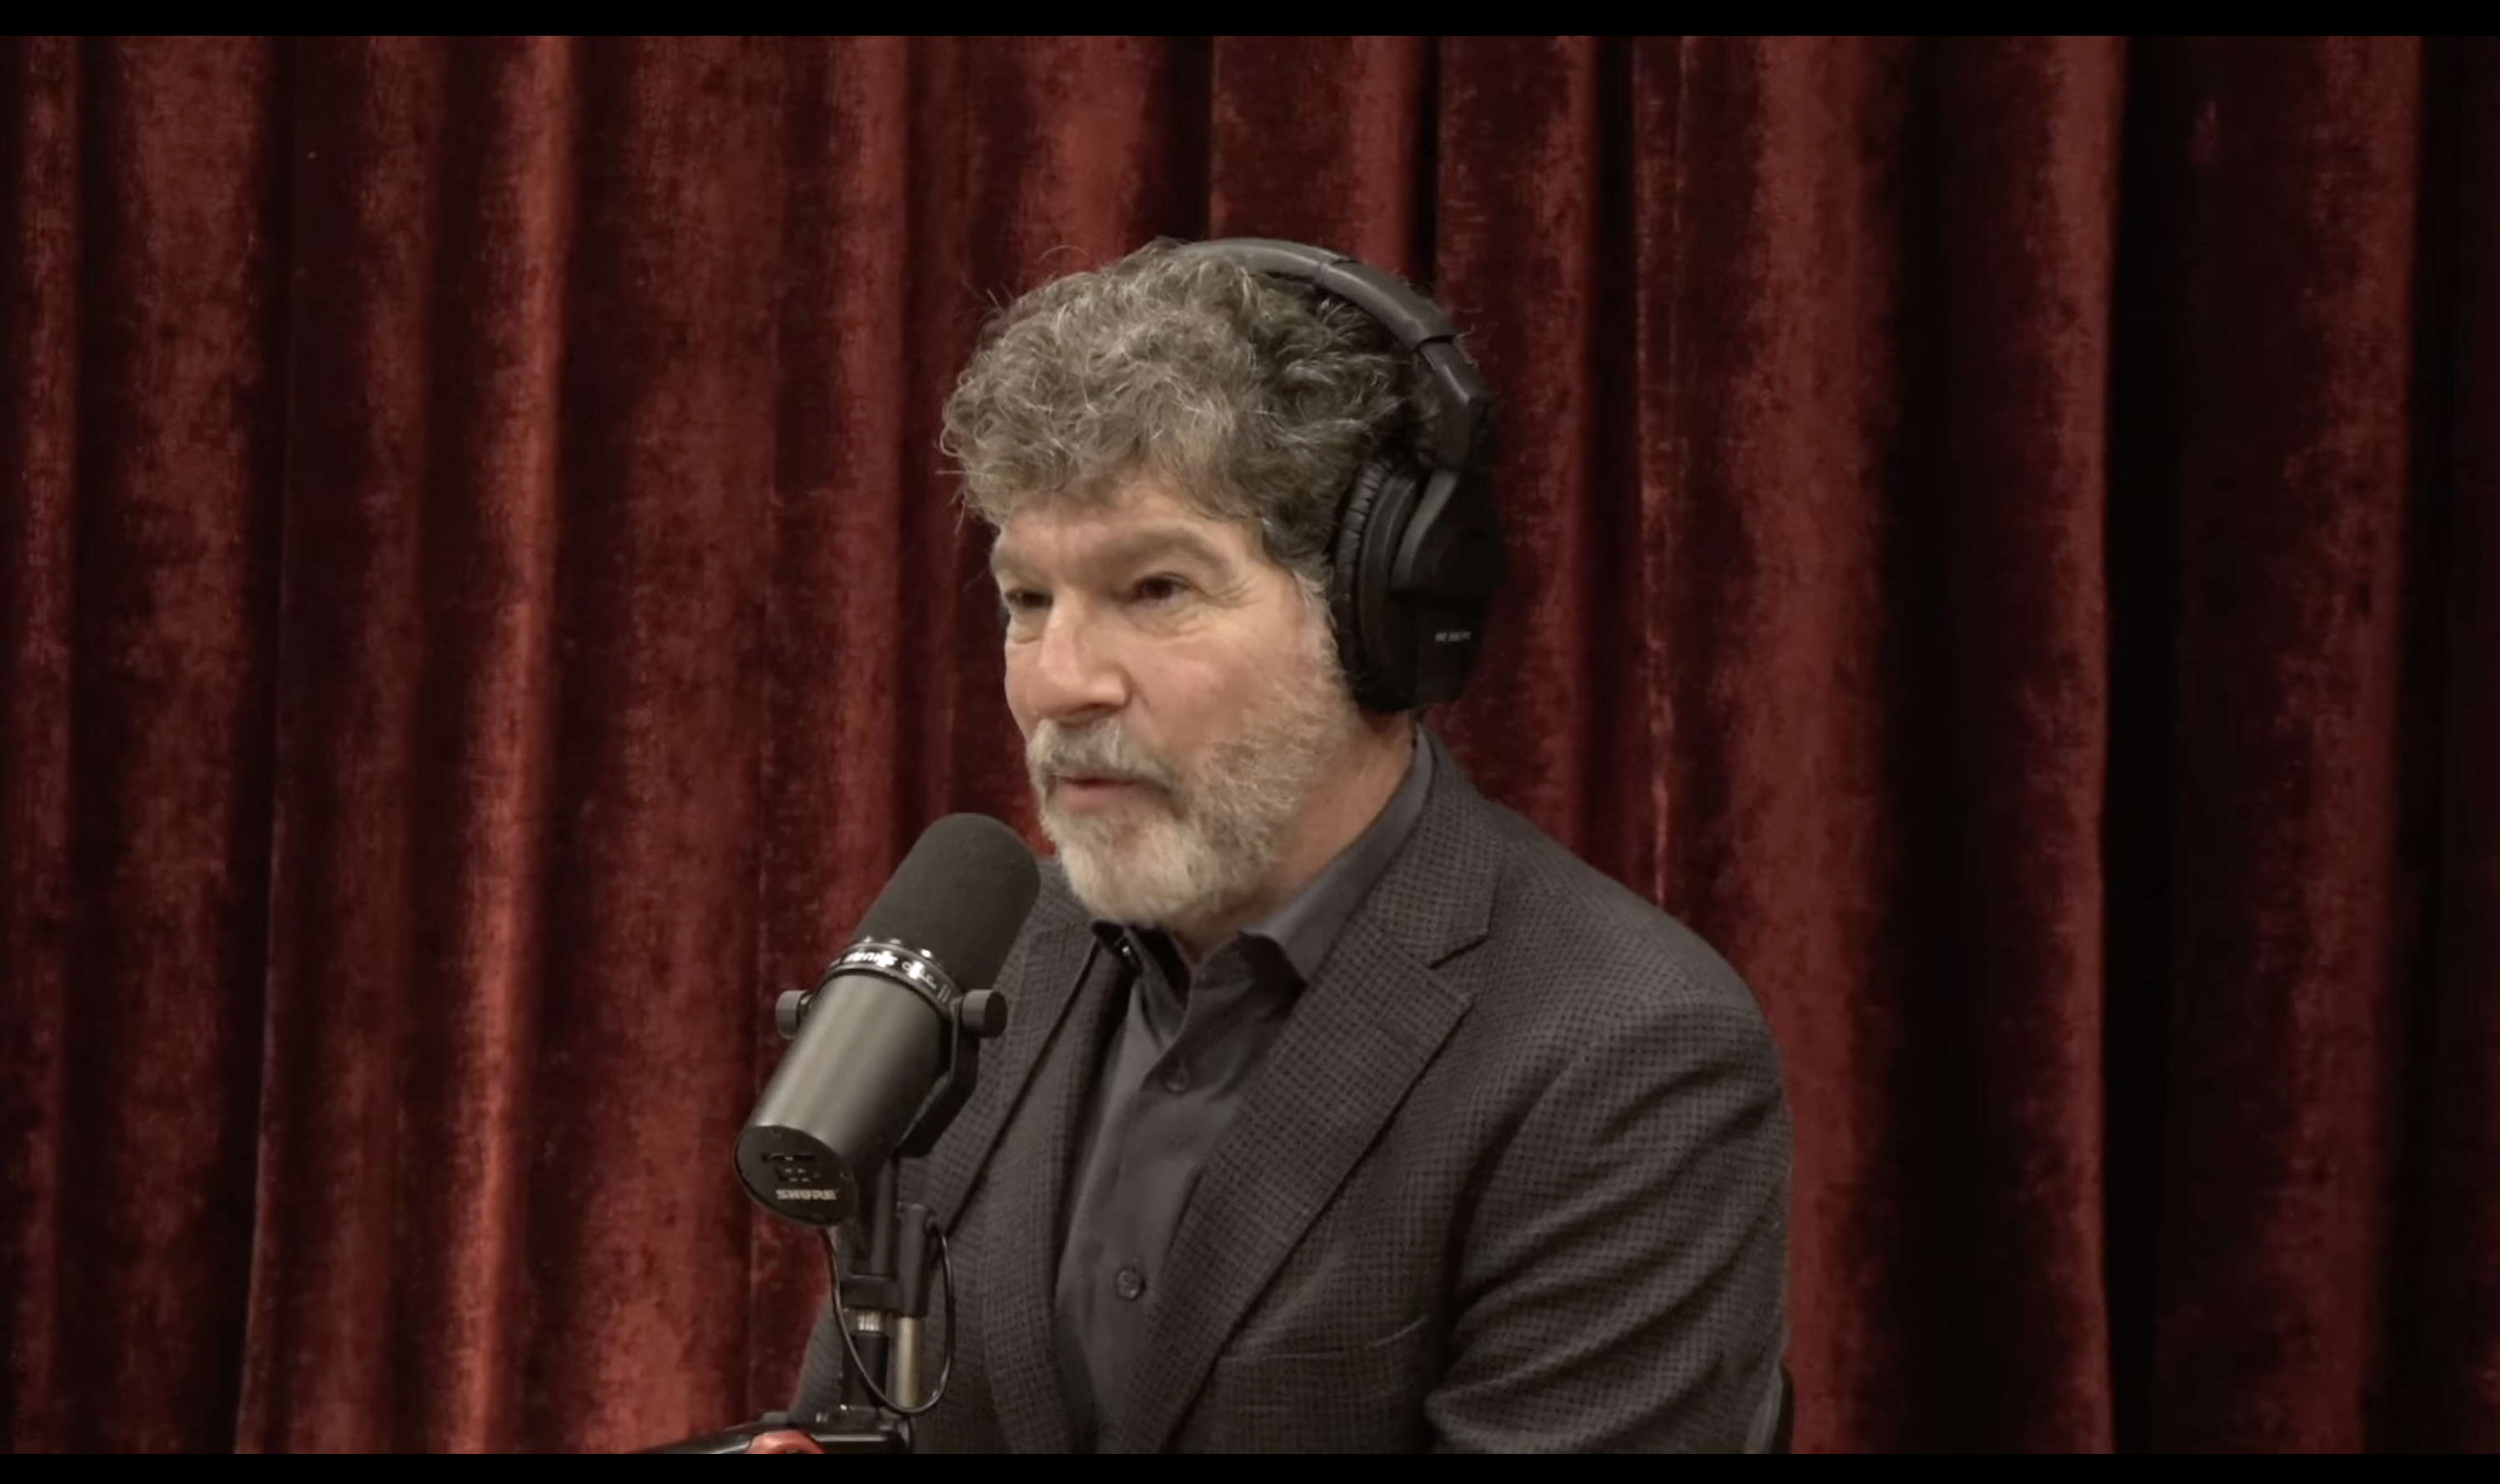 Joe Rogan and Bret Weinstein Promote AIDS Denialism to an Audience of Millions 